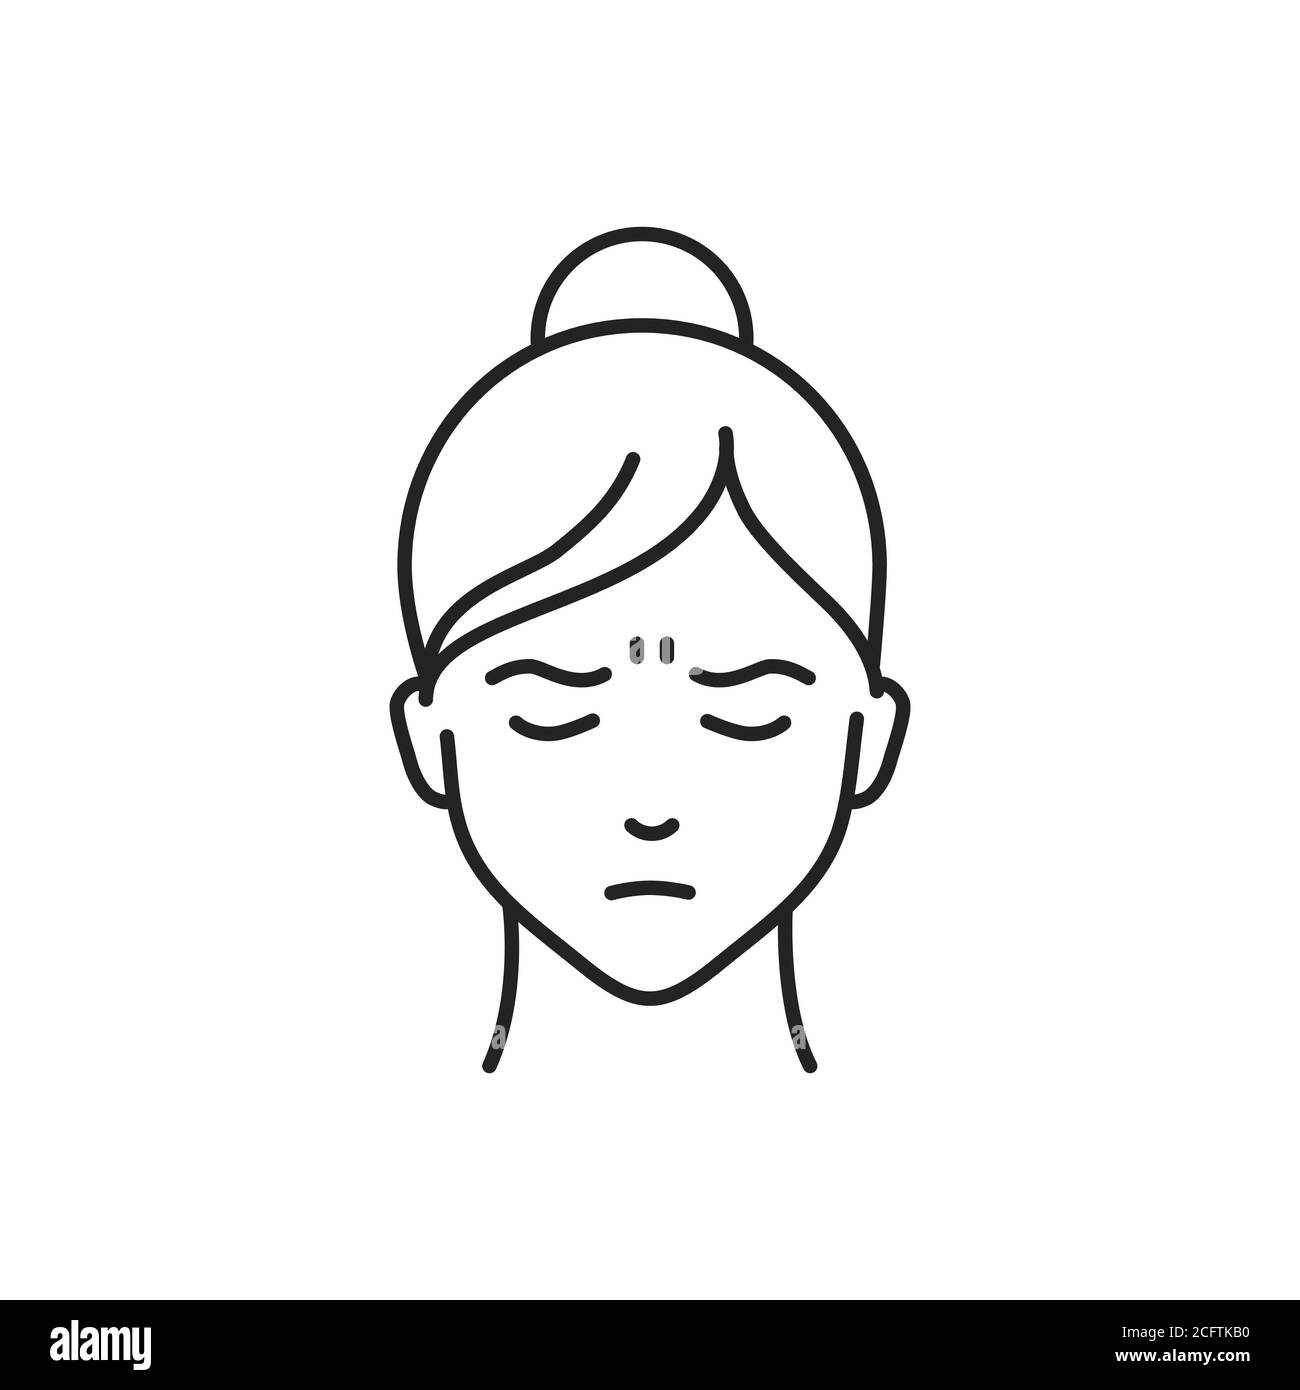 Human feeling grief line black icon. Face of a young girl depicting emotion sketch element. Cute character on white background. Stock Vector